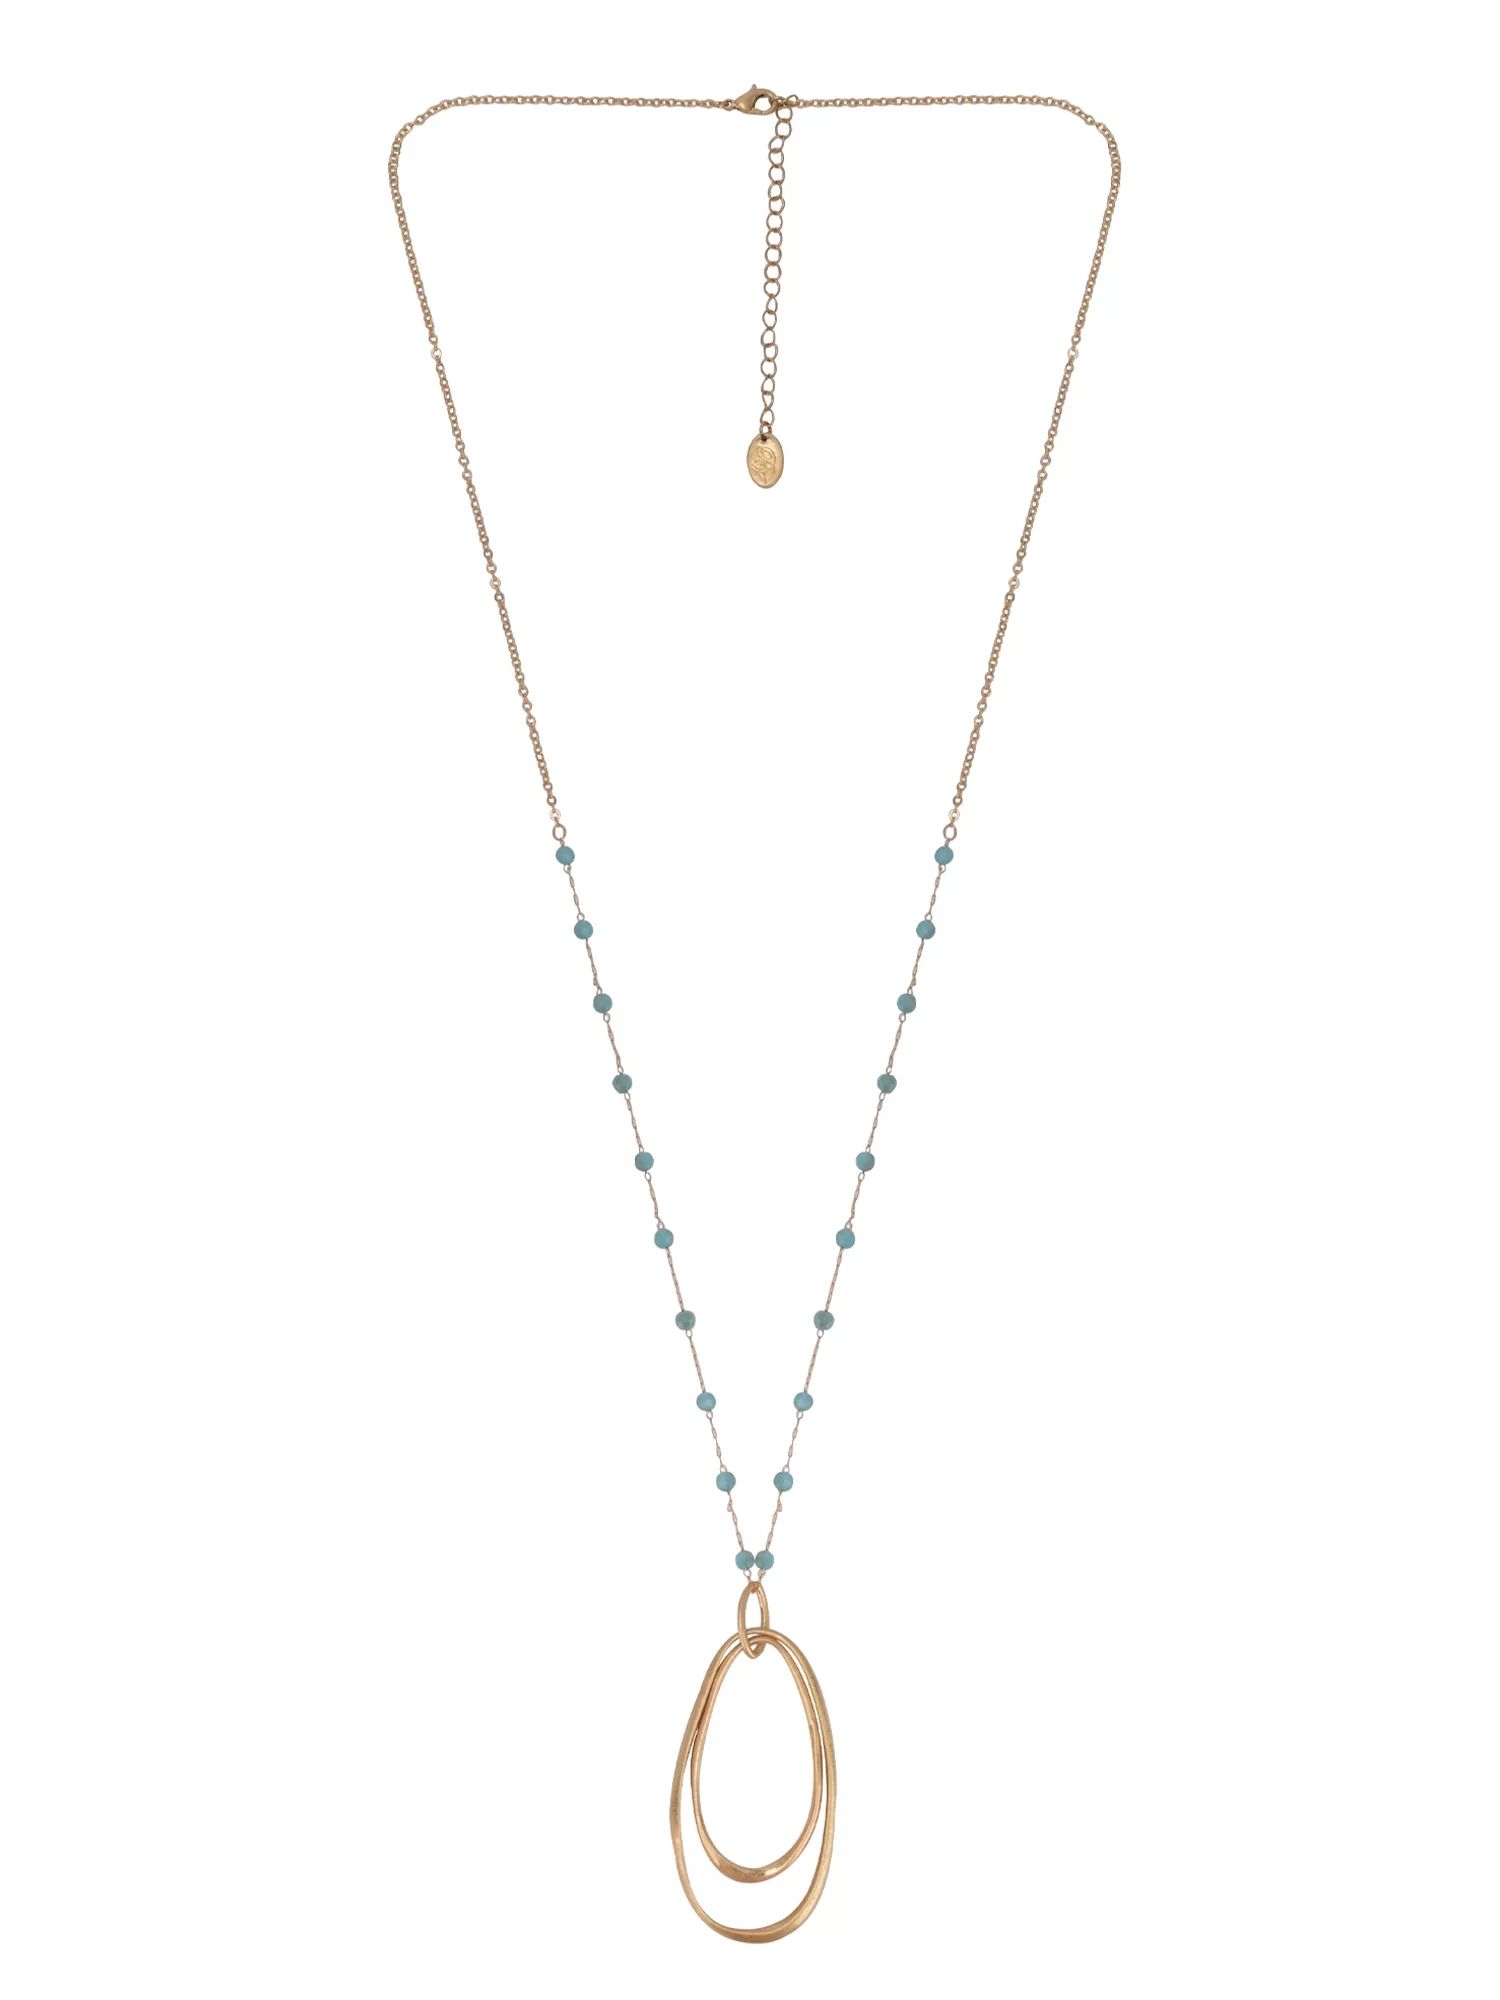 The Pioneer Woman Gold with Turquoise Beads Long Double Oval Pendant Necklace - Walmart.com | Walmart (US)